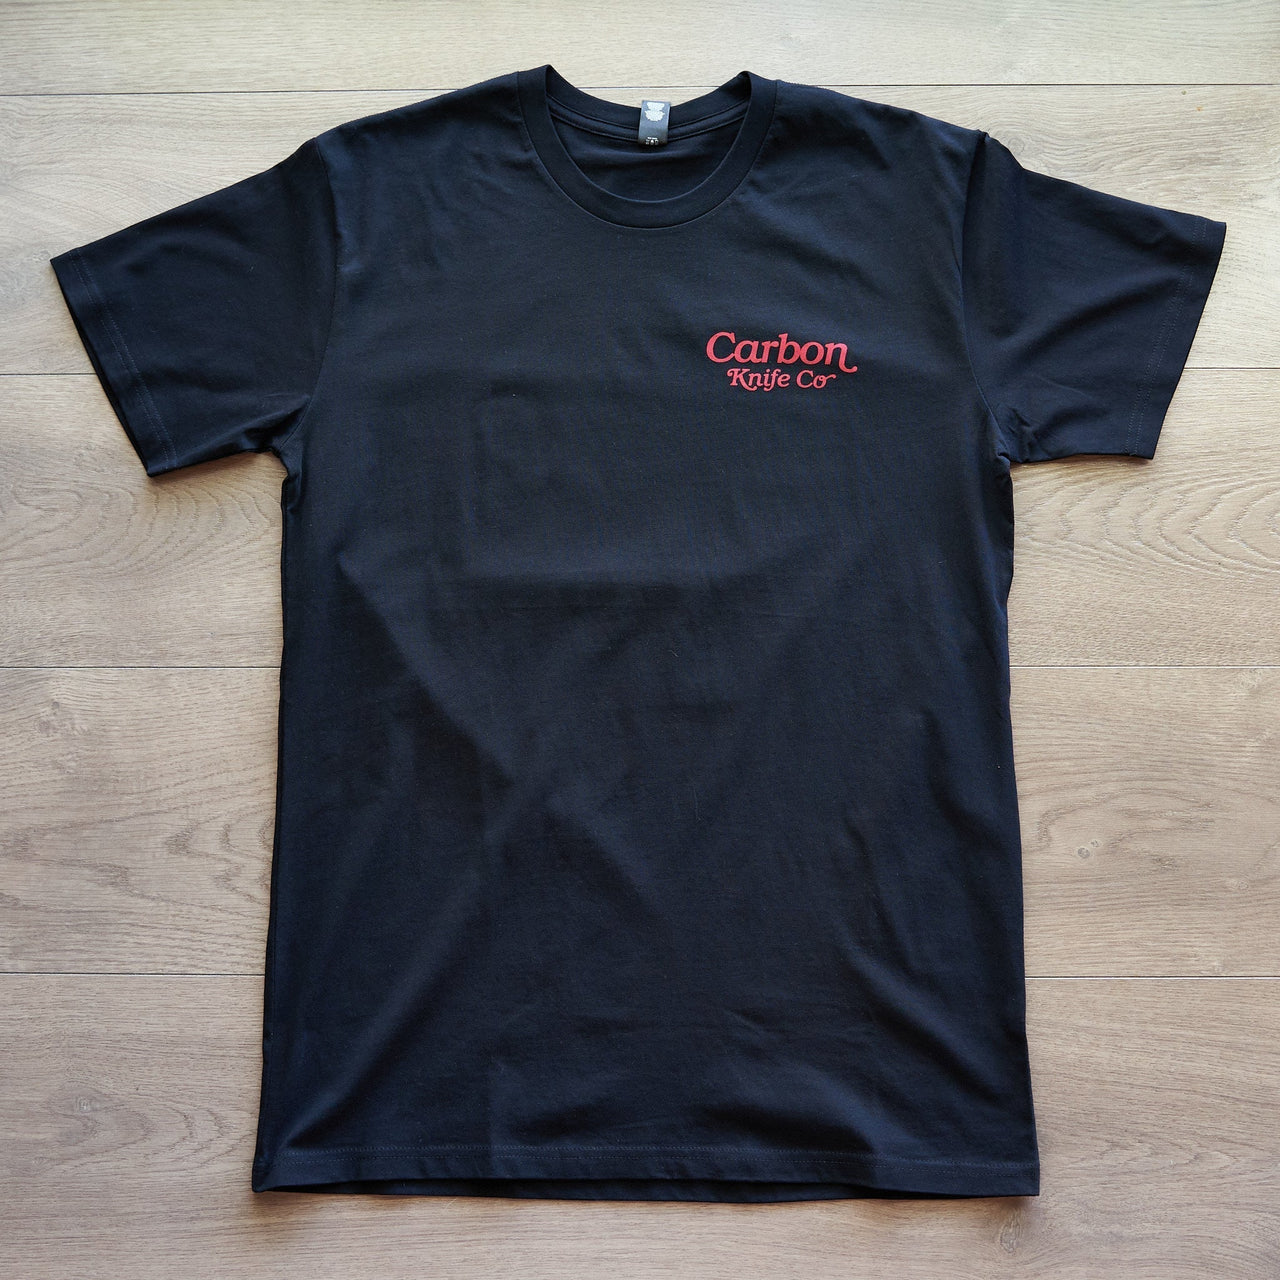 "Thank You For Chopping" T-shirt-Carbon Knife Co-Small-Carbon Knife Co